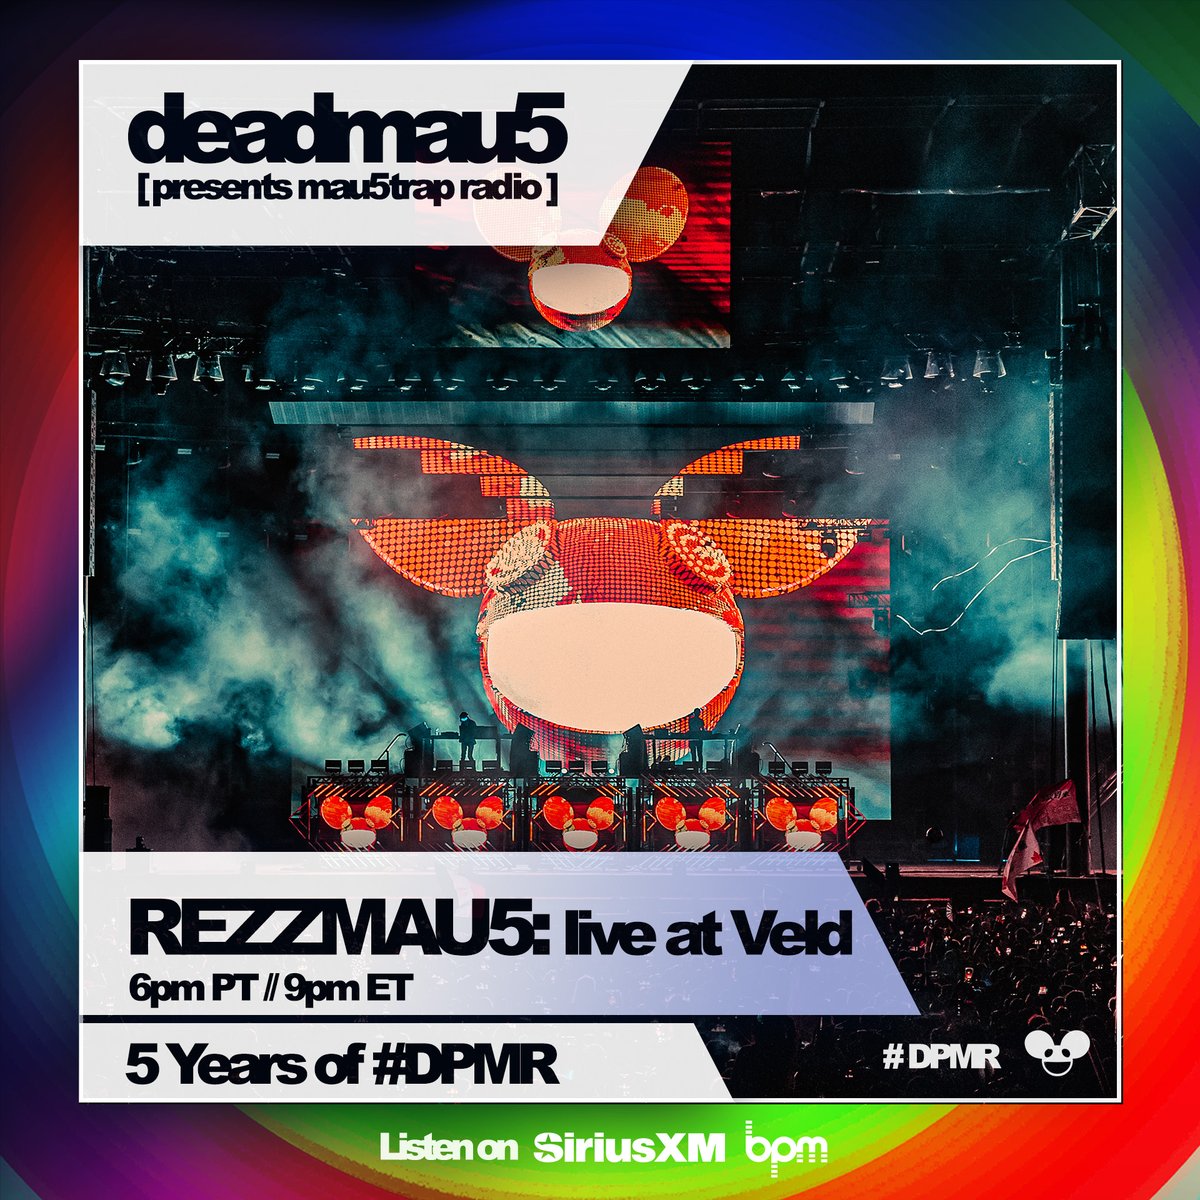 The time has come… The REZZMAU5 debut set from #VELD2023 hits the airwaves tonight!  ⏰ Tune in to @siriusxm @sxmelectro at 6pm PT // 9pm EST #DPMR @deadmau5 @mau5trap @OfficialRezz siriusxm.us/mau5trapradio